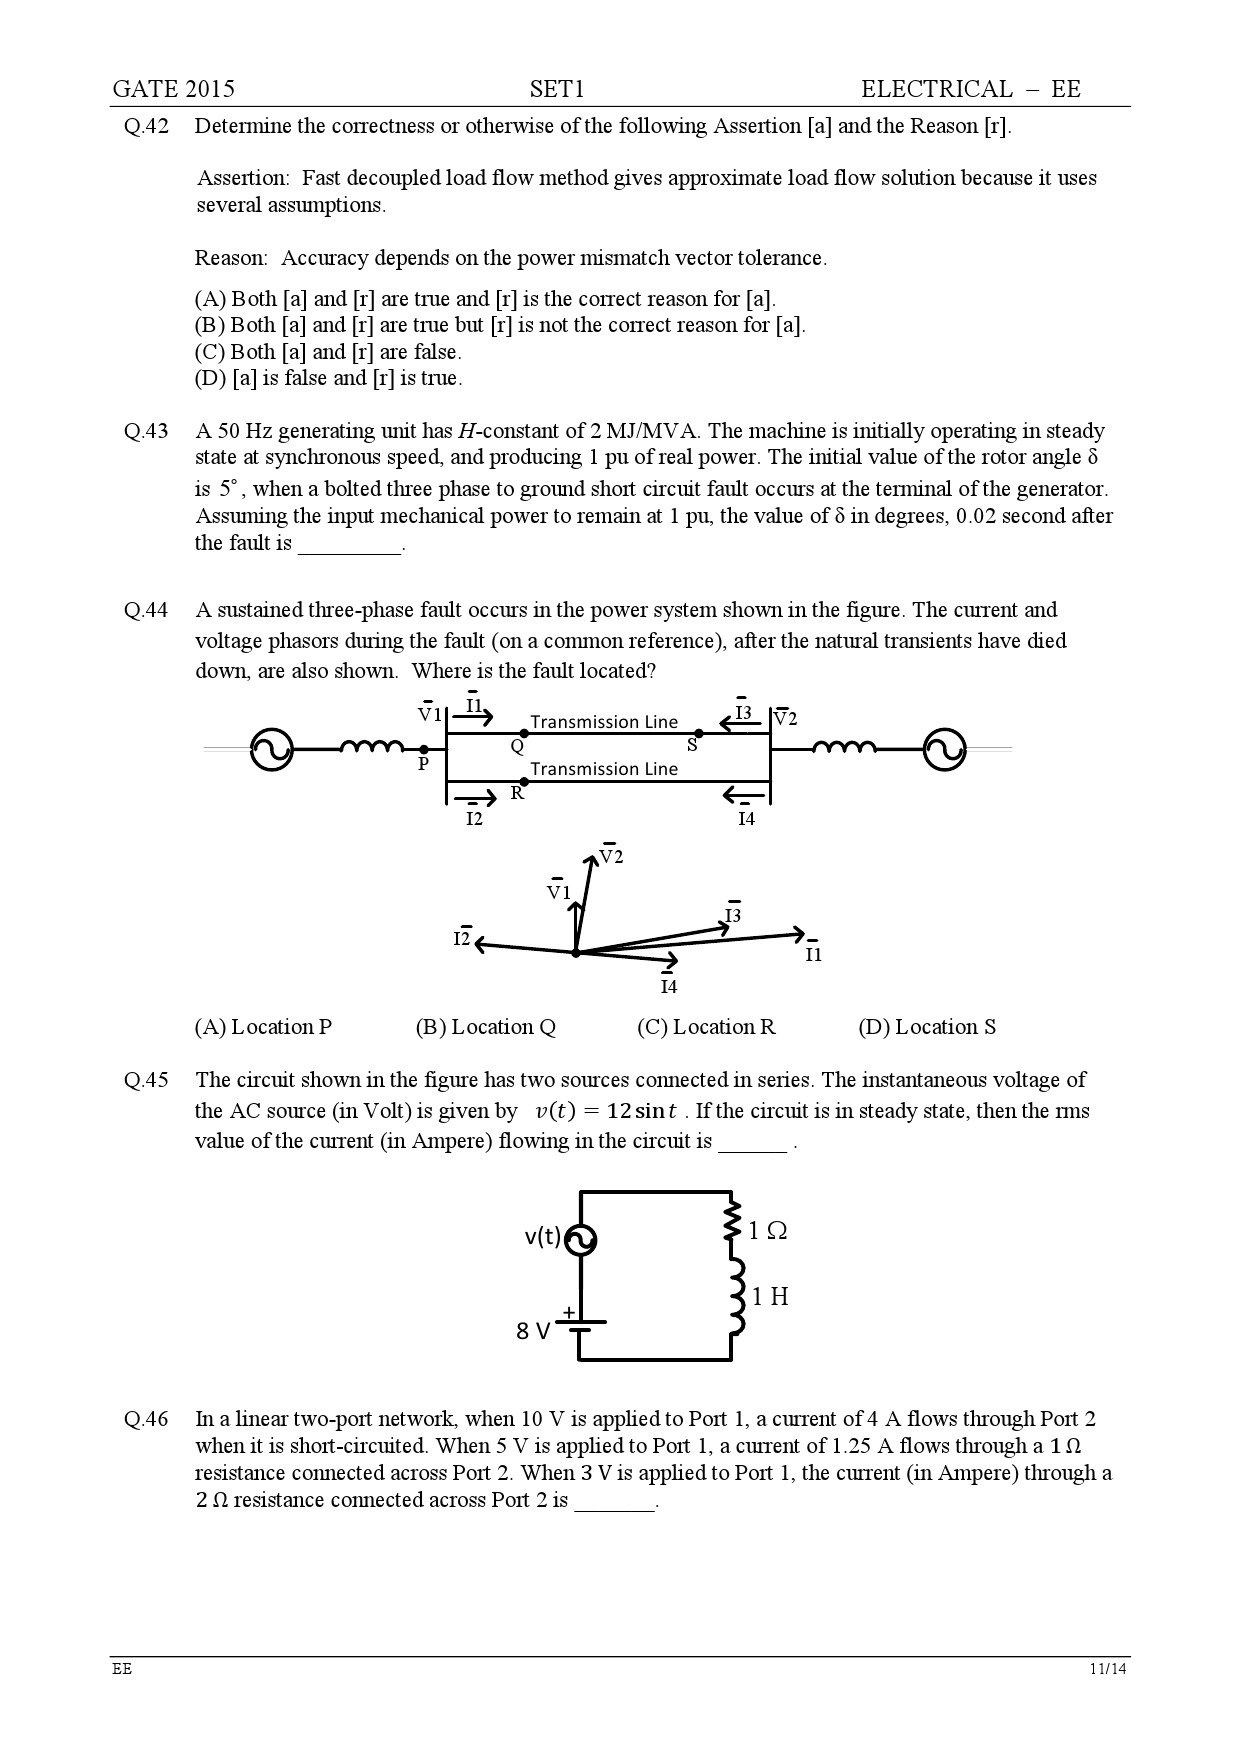 GATE Exam Question Paper 2015 Electrical Engineering Set 1 11